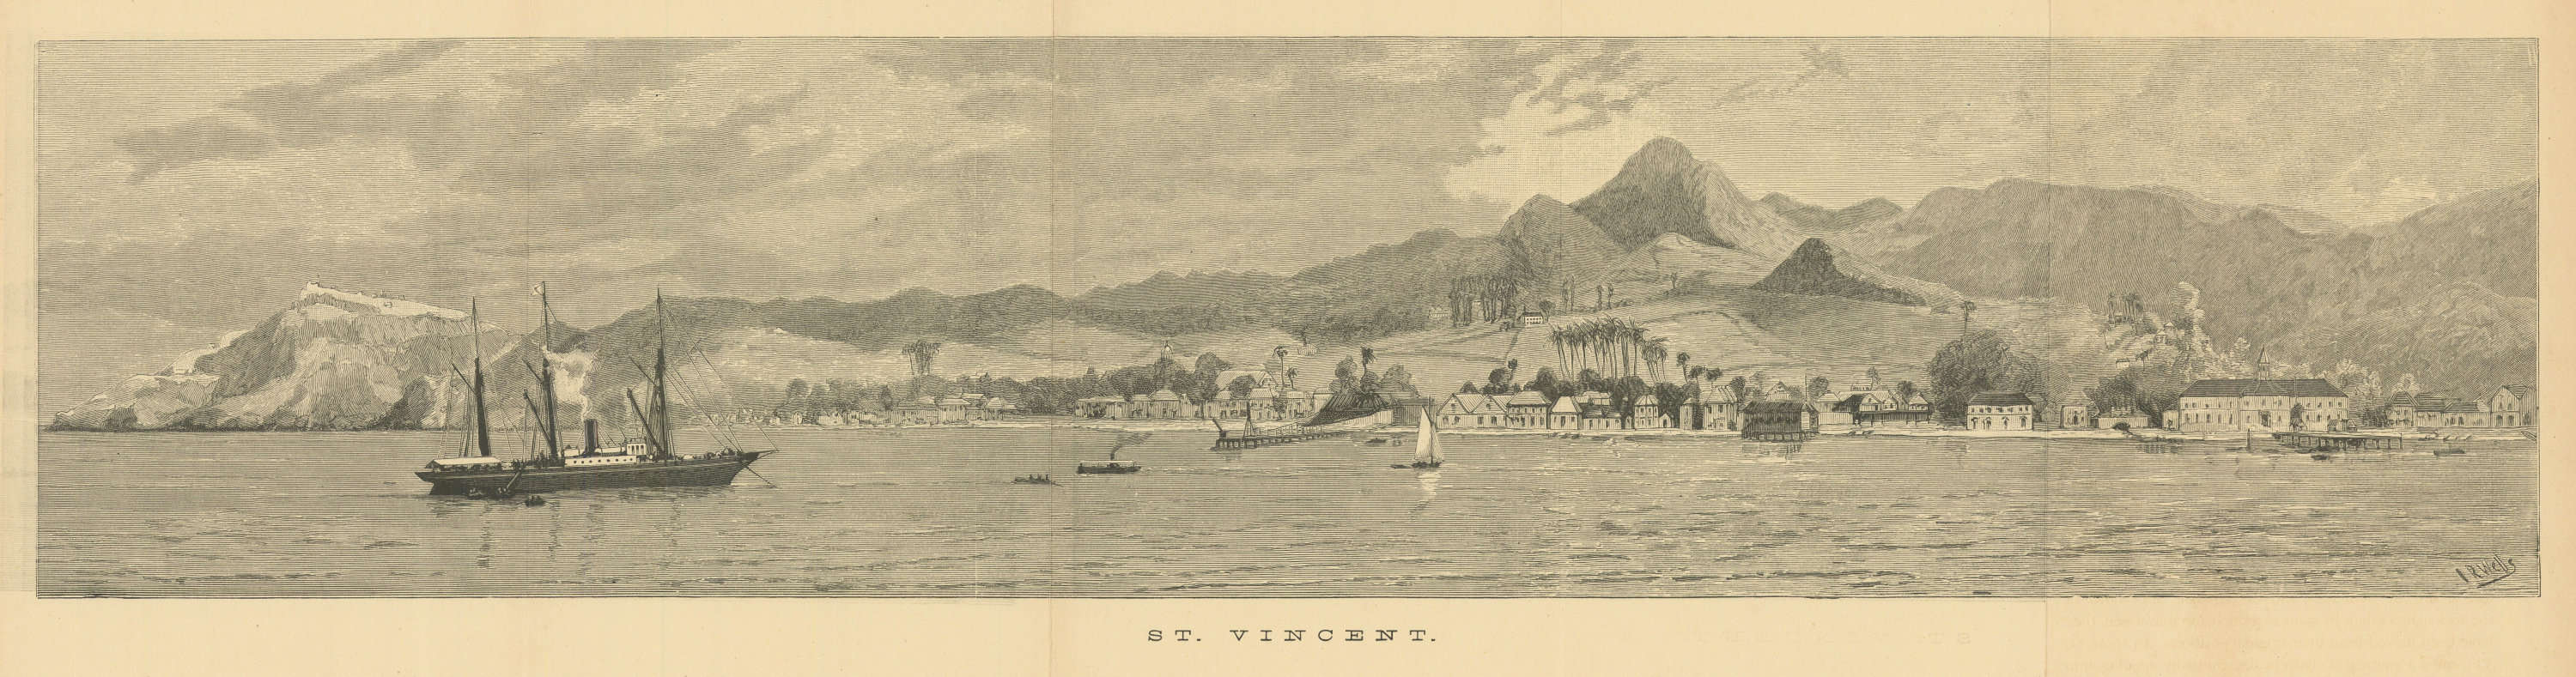 St. Vincent, West Indies. Panorama of Kingstown from the sea 1889 old print